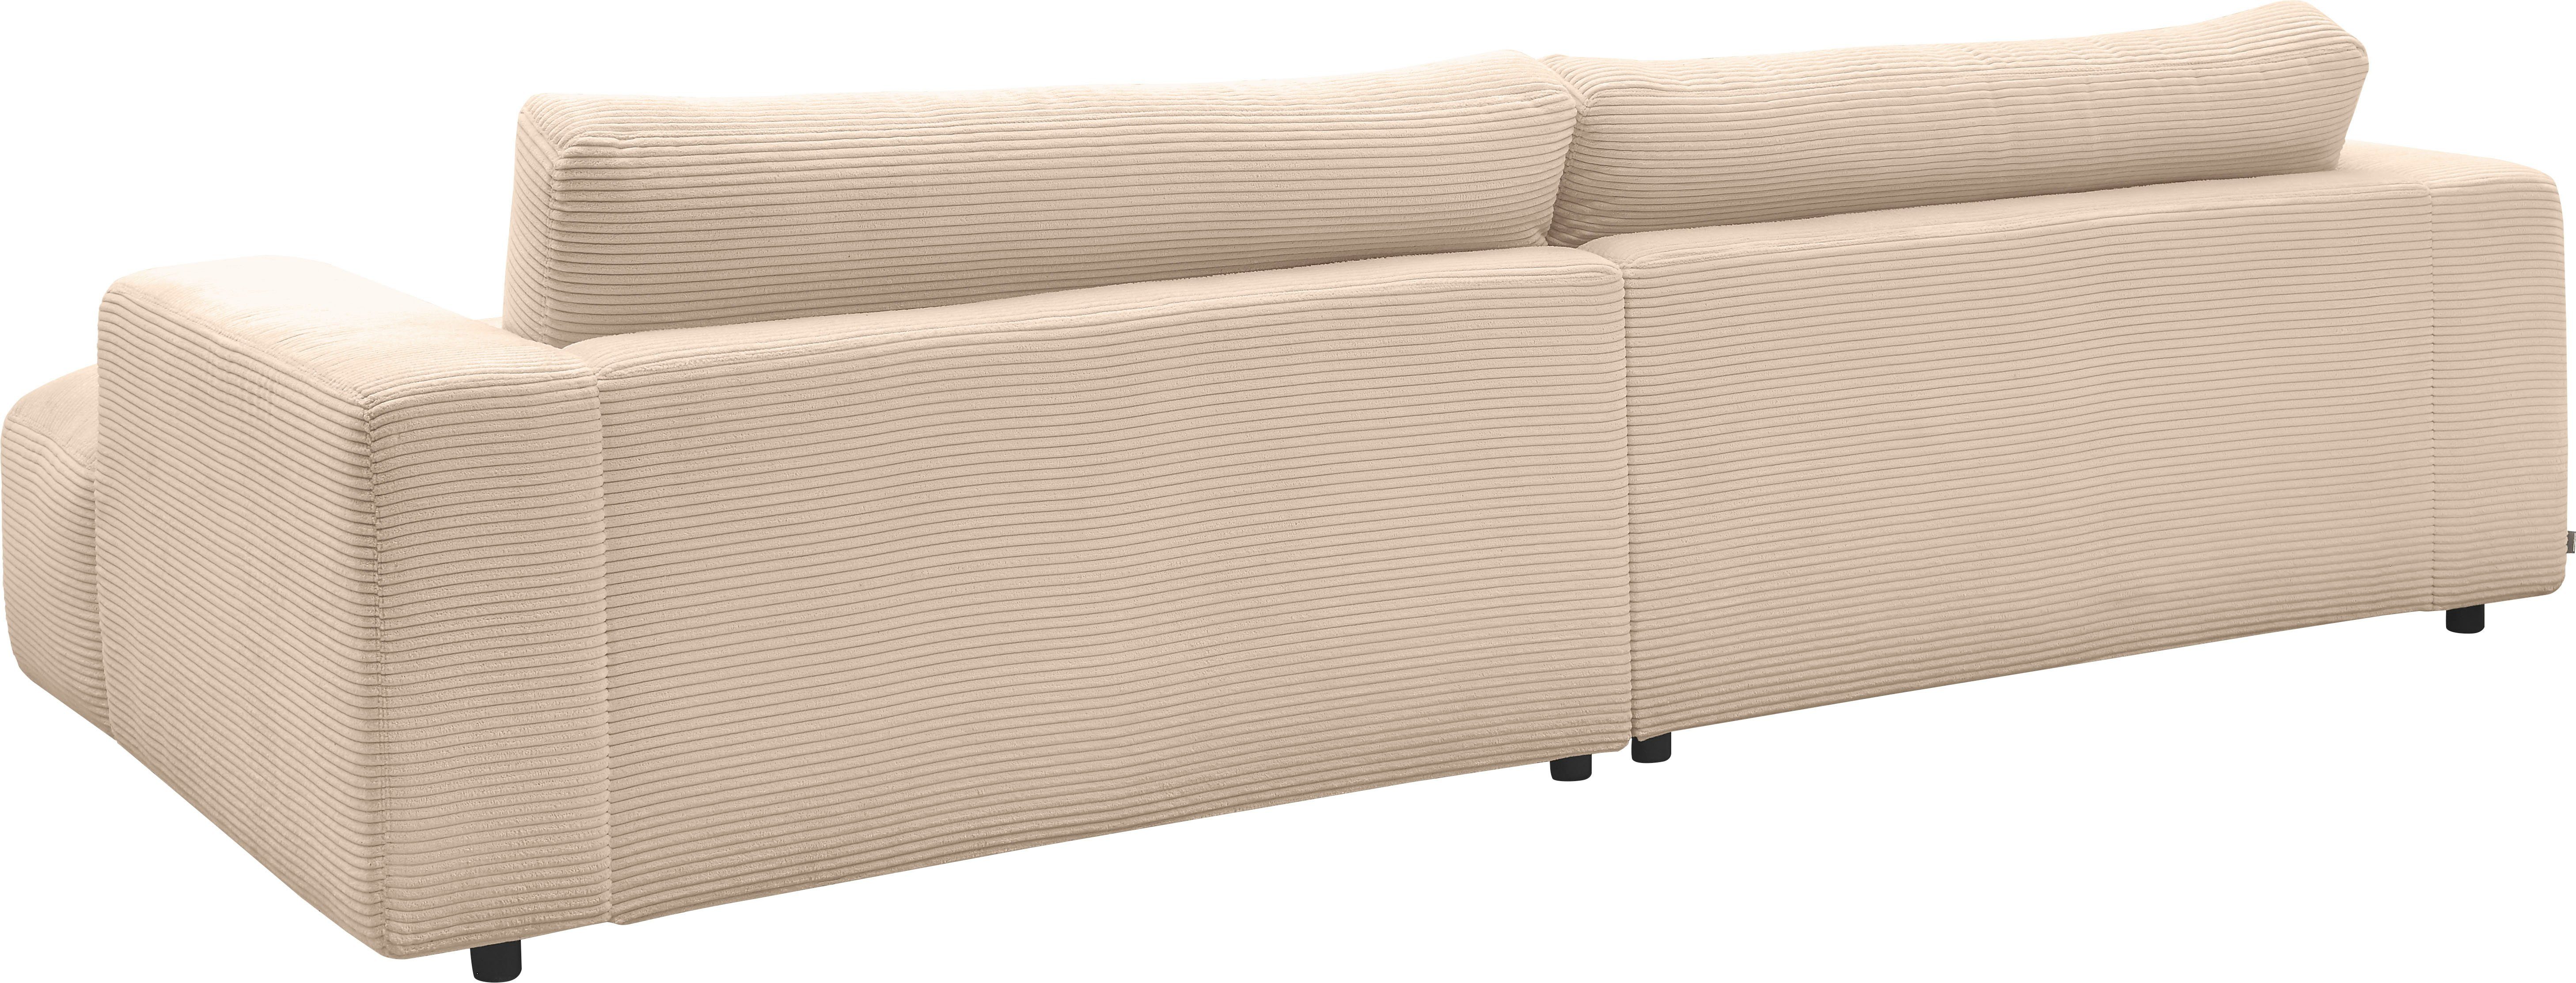 GALLERY M branded by 292 nature Breite Musterring cm Loungesofa Lucia, Cord-Bezug